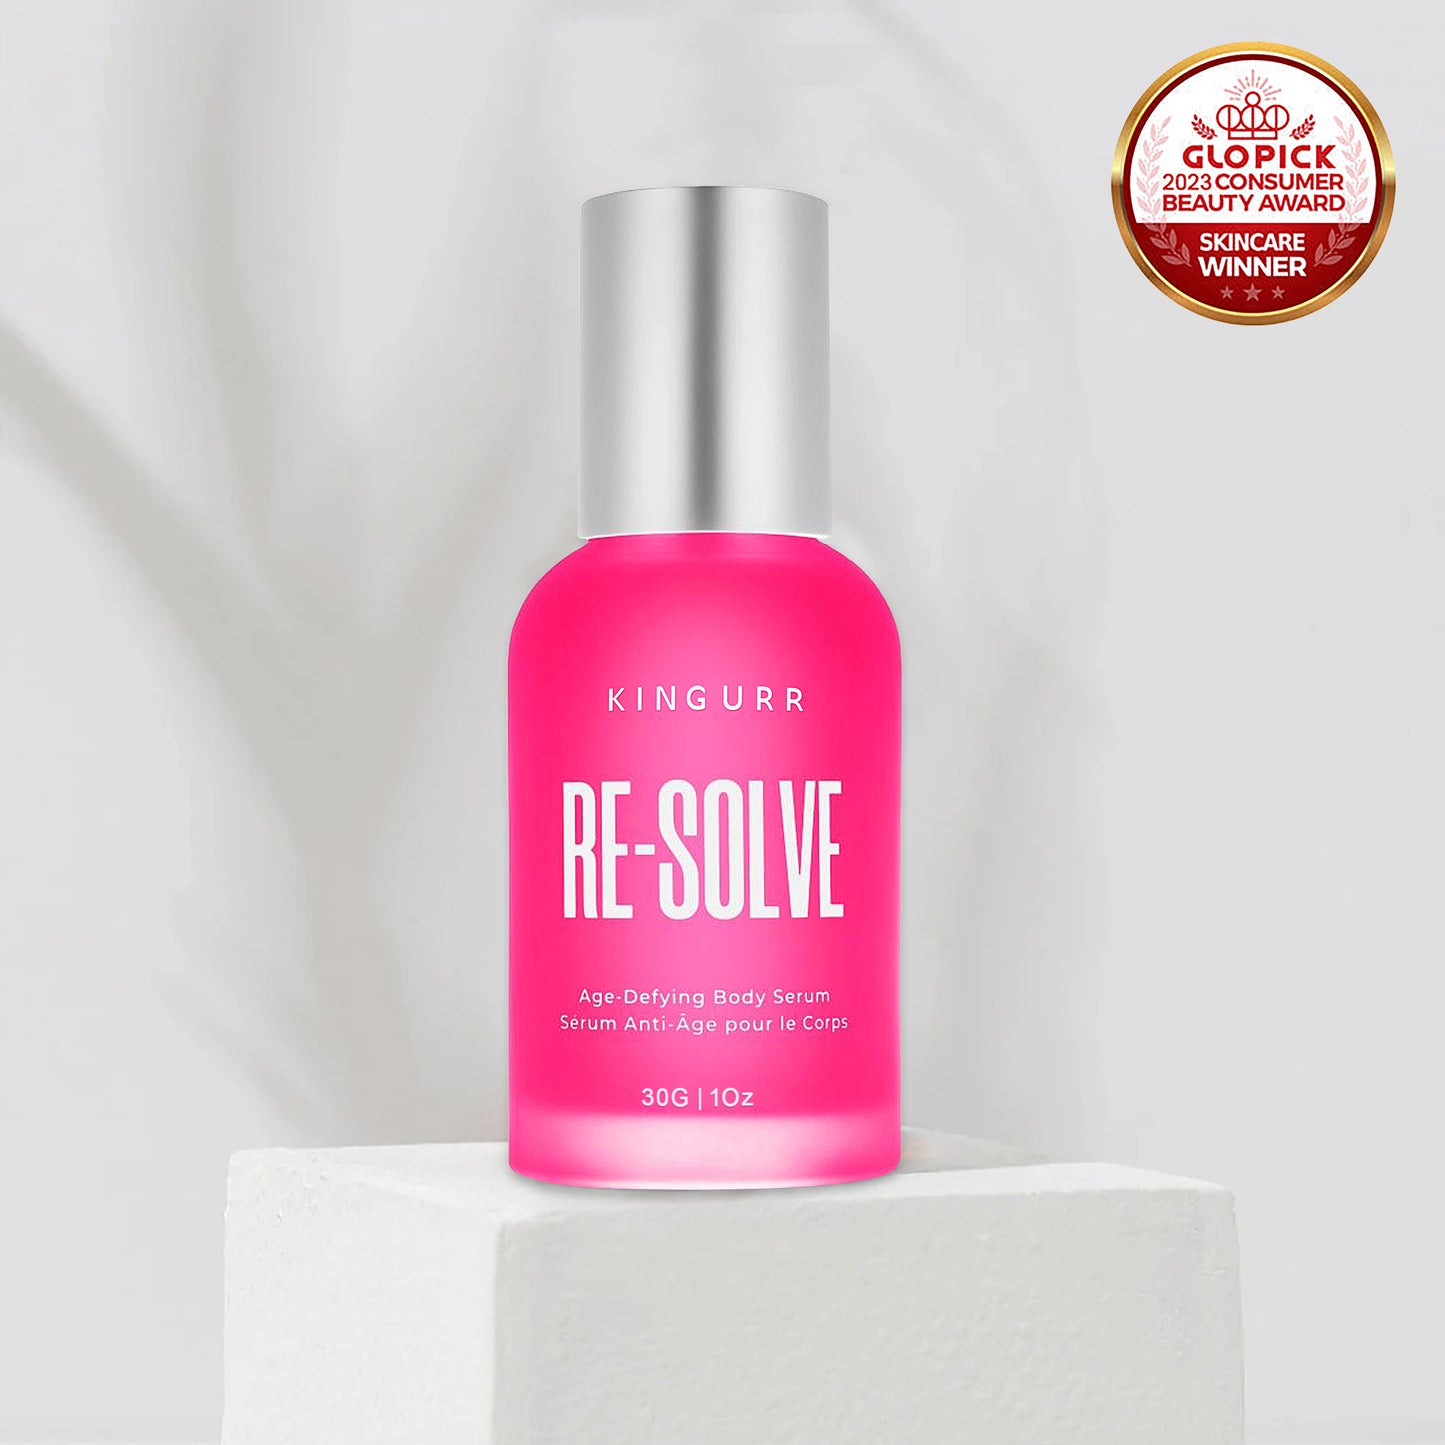 KINGURR RE-SOLVE Age-Defying Body Serum(🔥Limited time discount last day)